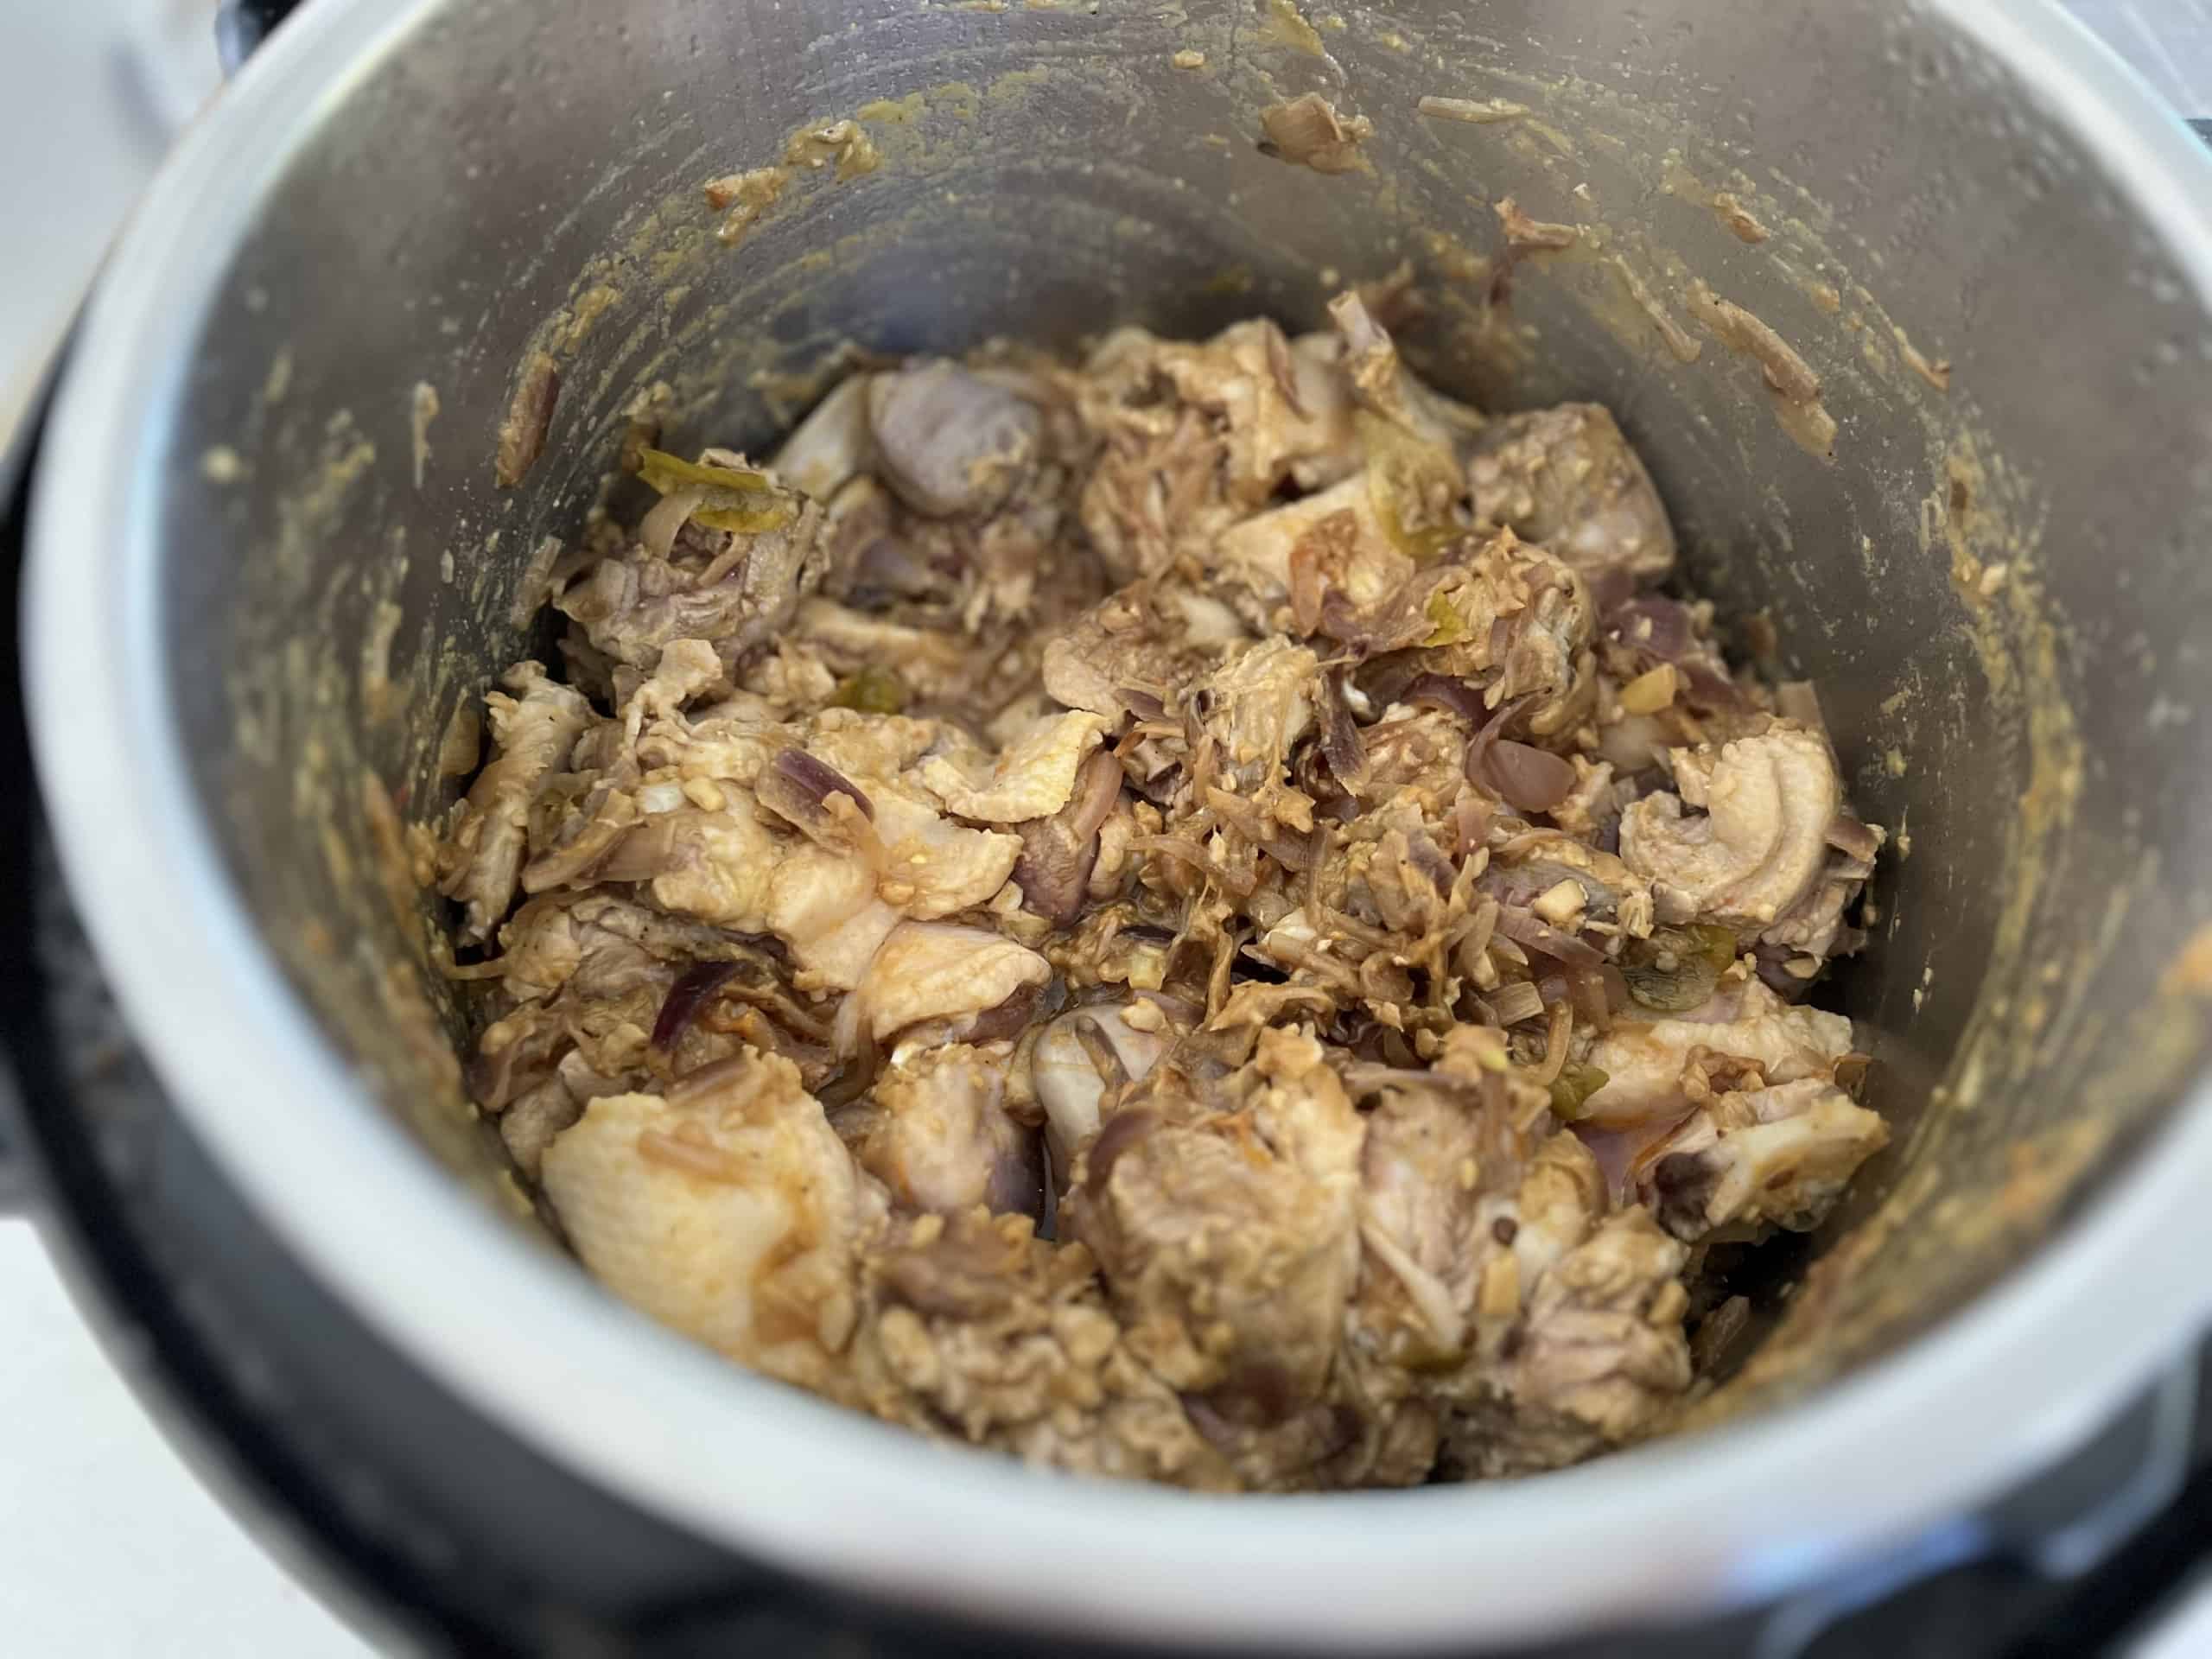 Pressure cook the duck in a regular pressure cooker or in Instant Pot